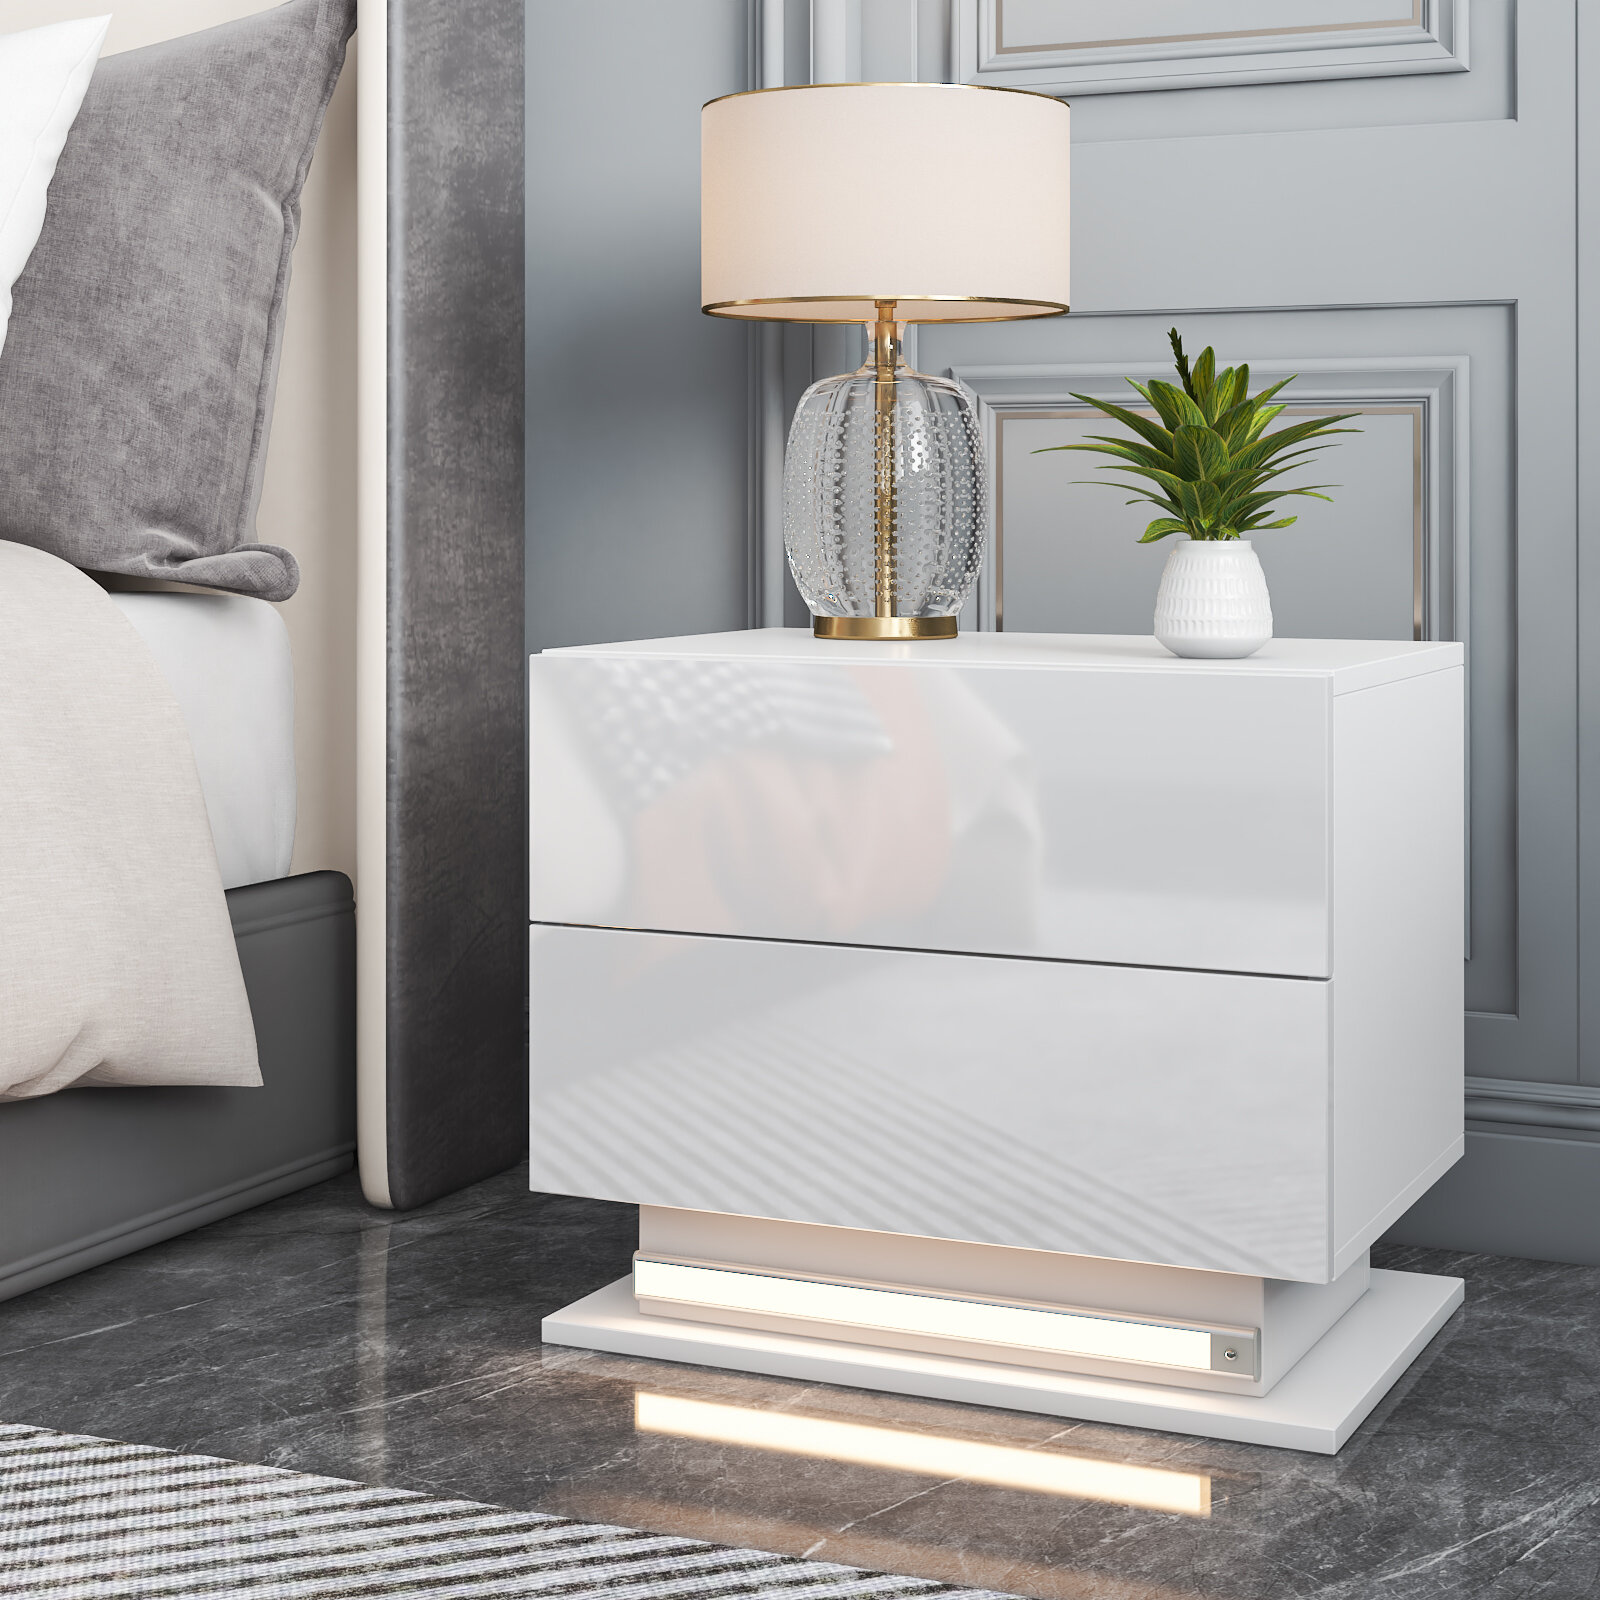 Image of Hommpa Led Nightstand with 2 High Gloss Drawers Modern White Nightstands with Smart Motion Sensor Rechargeable Led Light